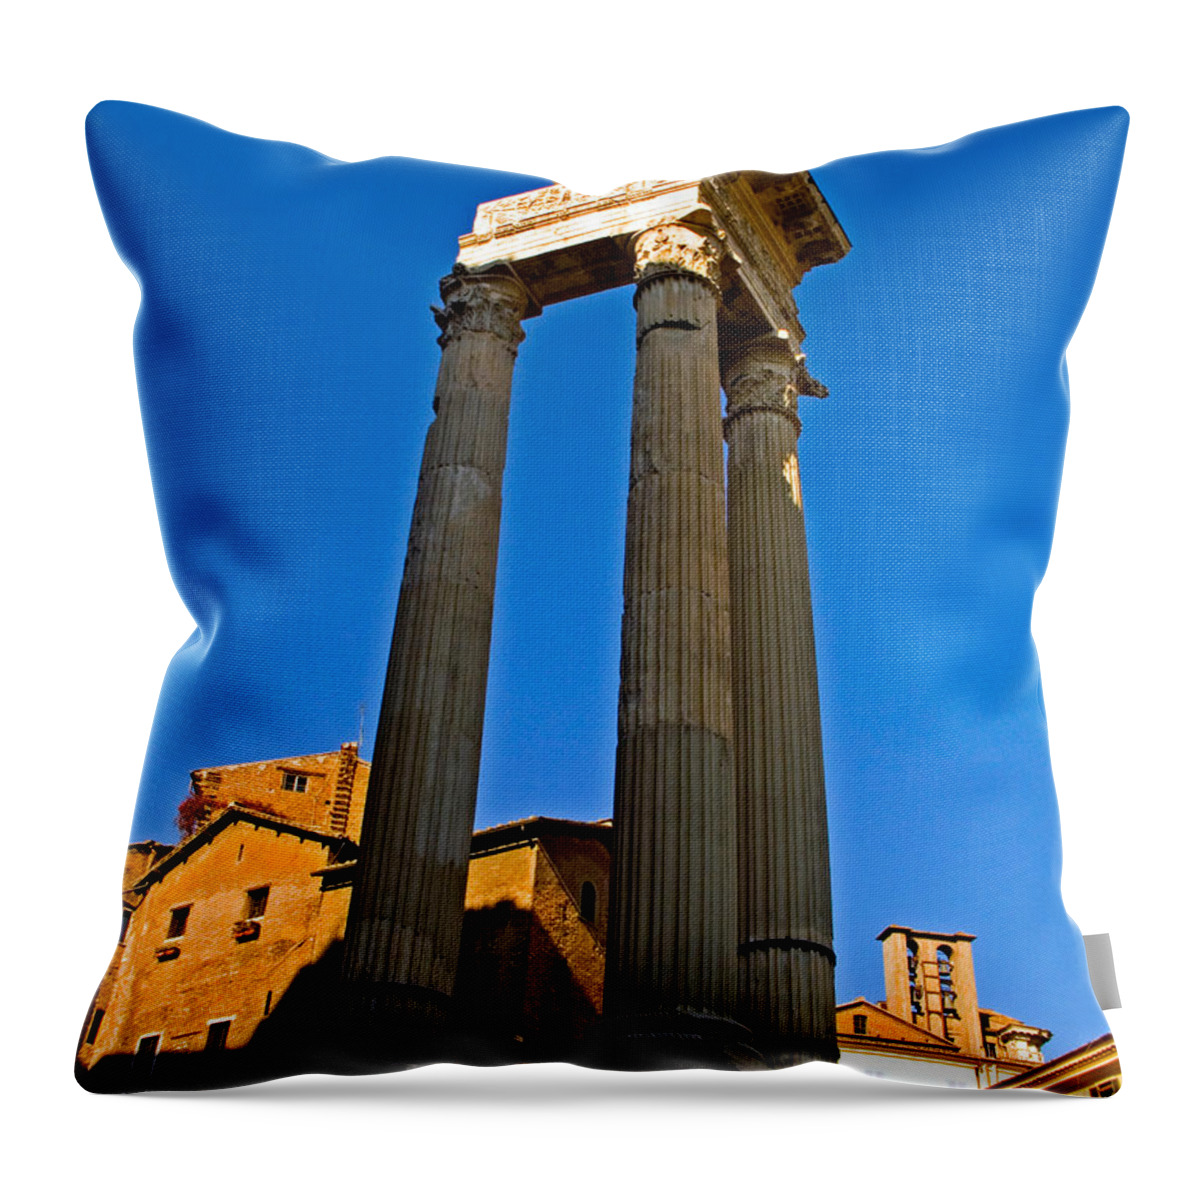 Italy Throw Pillow featuring the photograph Ancient Roman Columns by Tim Holt